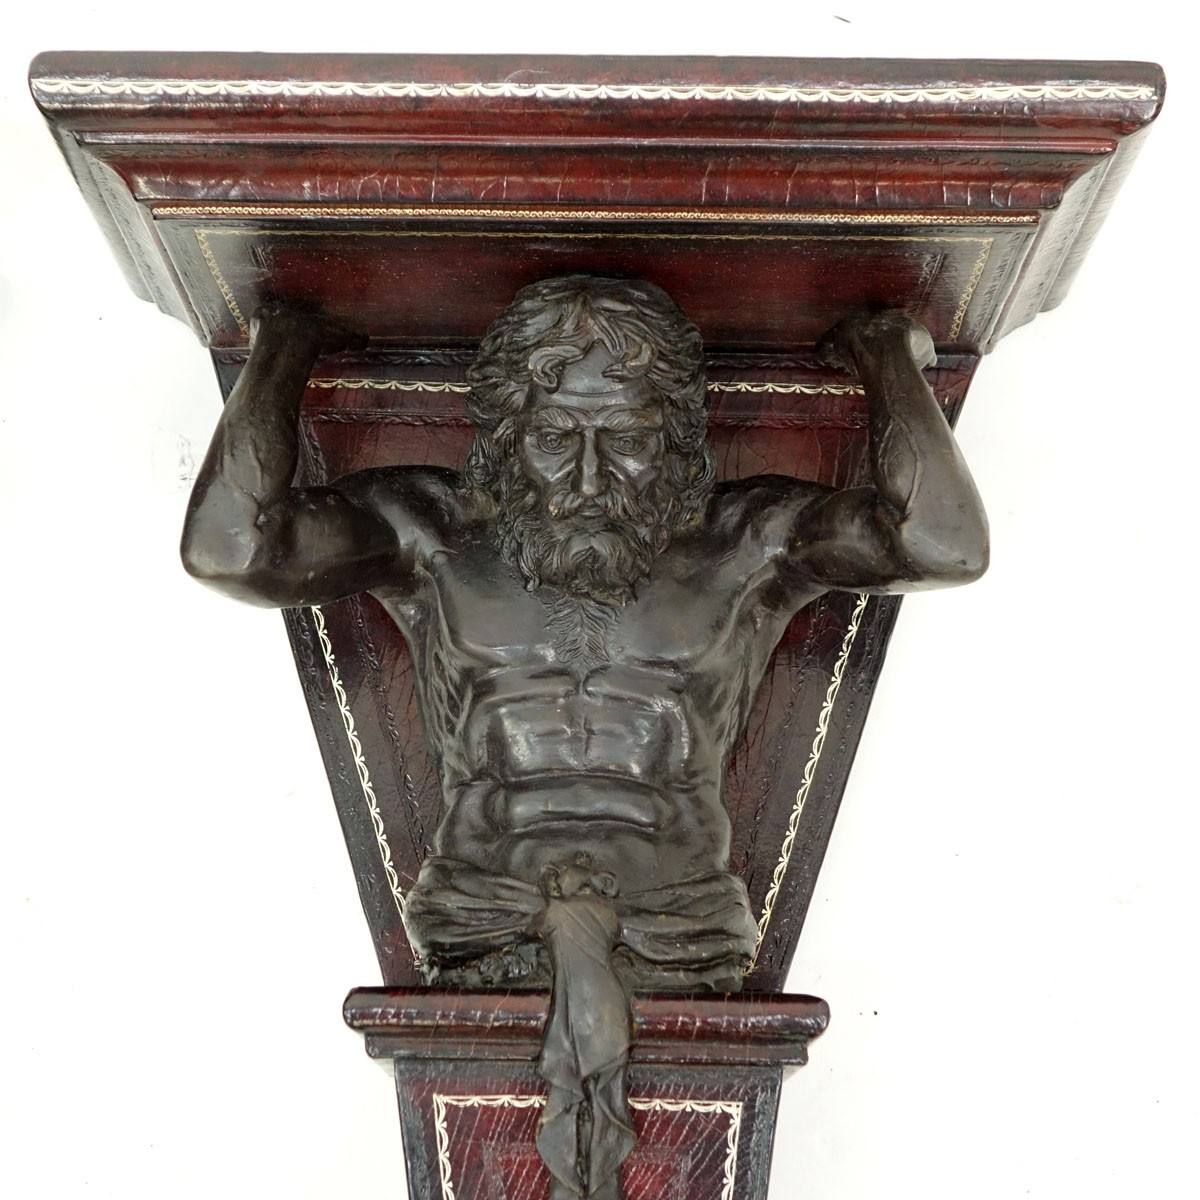 Pair of Renaissance Style, Figural Bronze and Textured Wood Wall Brackets. Nicks and rubbing, crackle to surface.